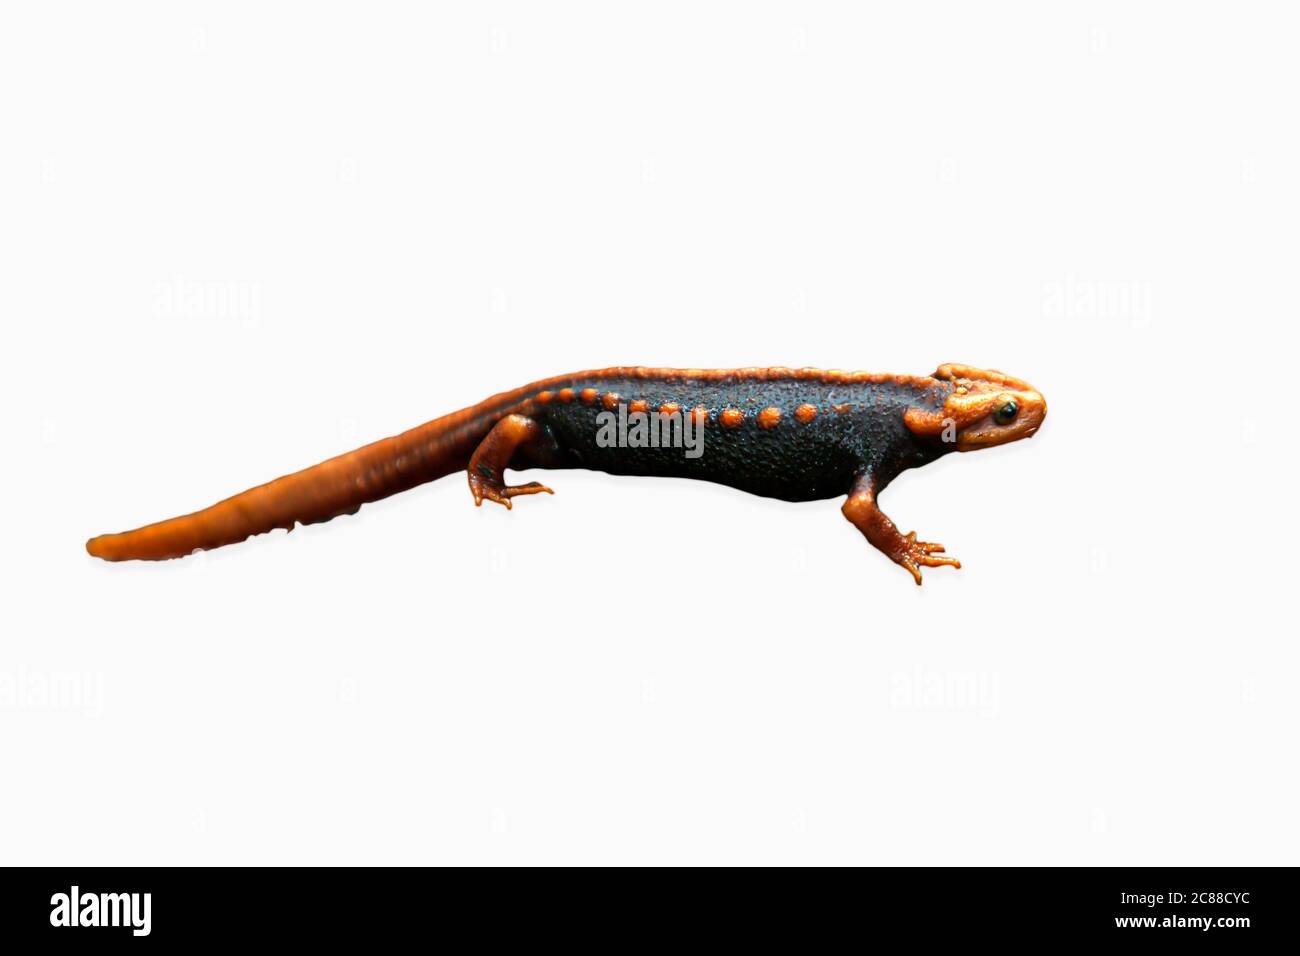 A Himalayan newt isolated on white background with clipping path. Stock Photo